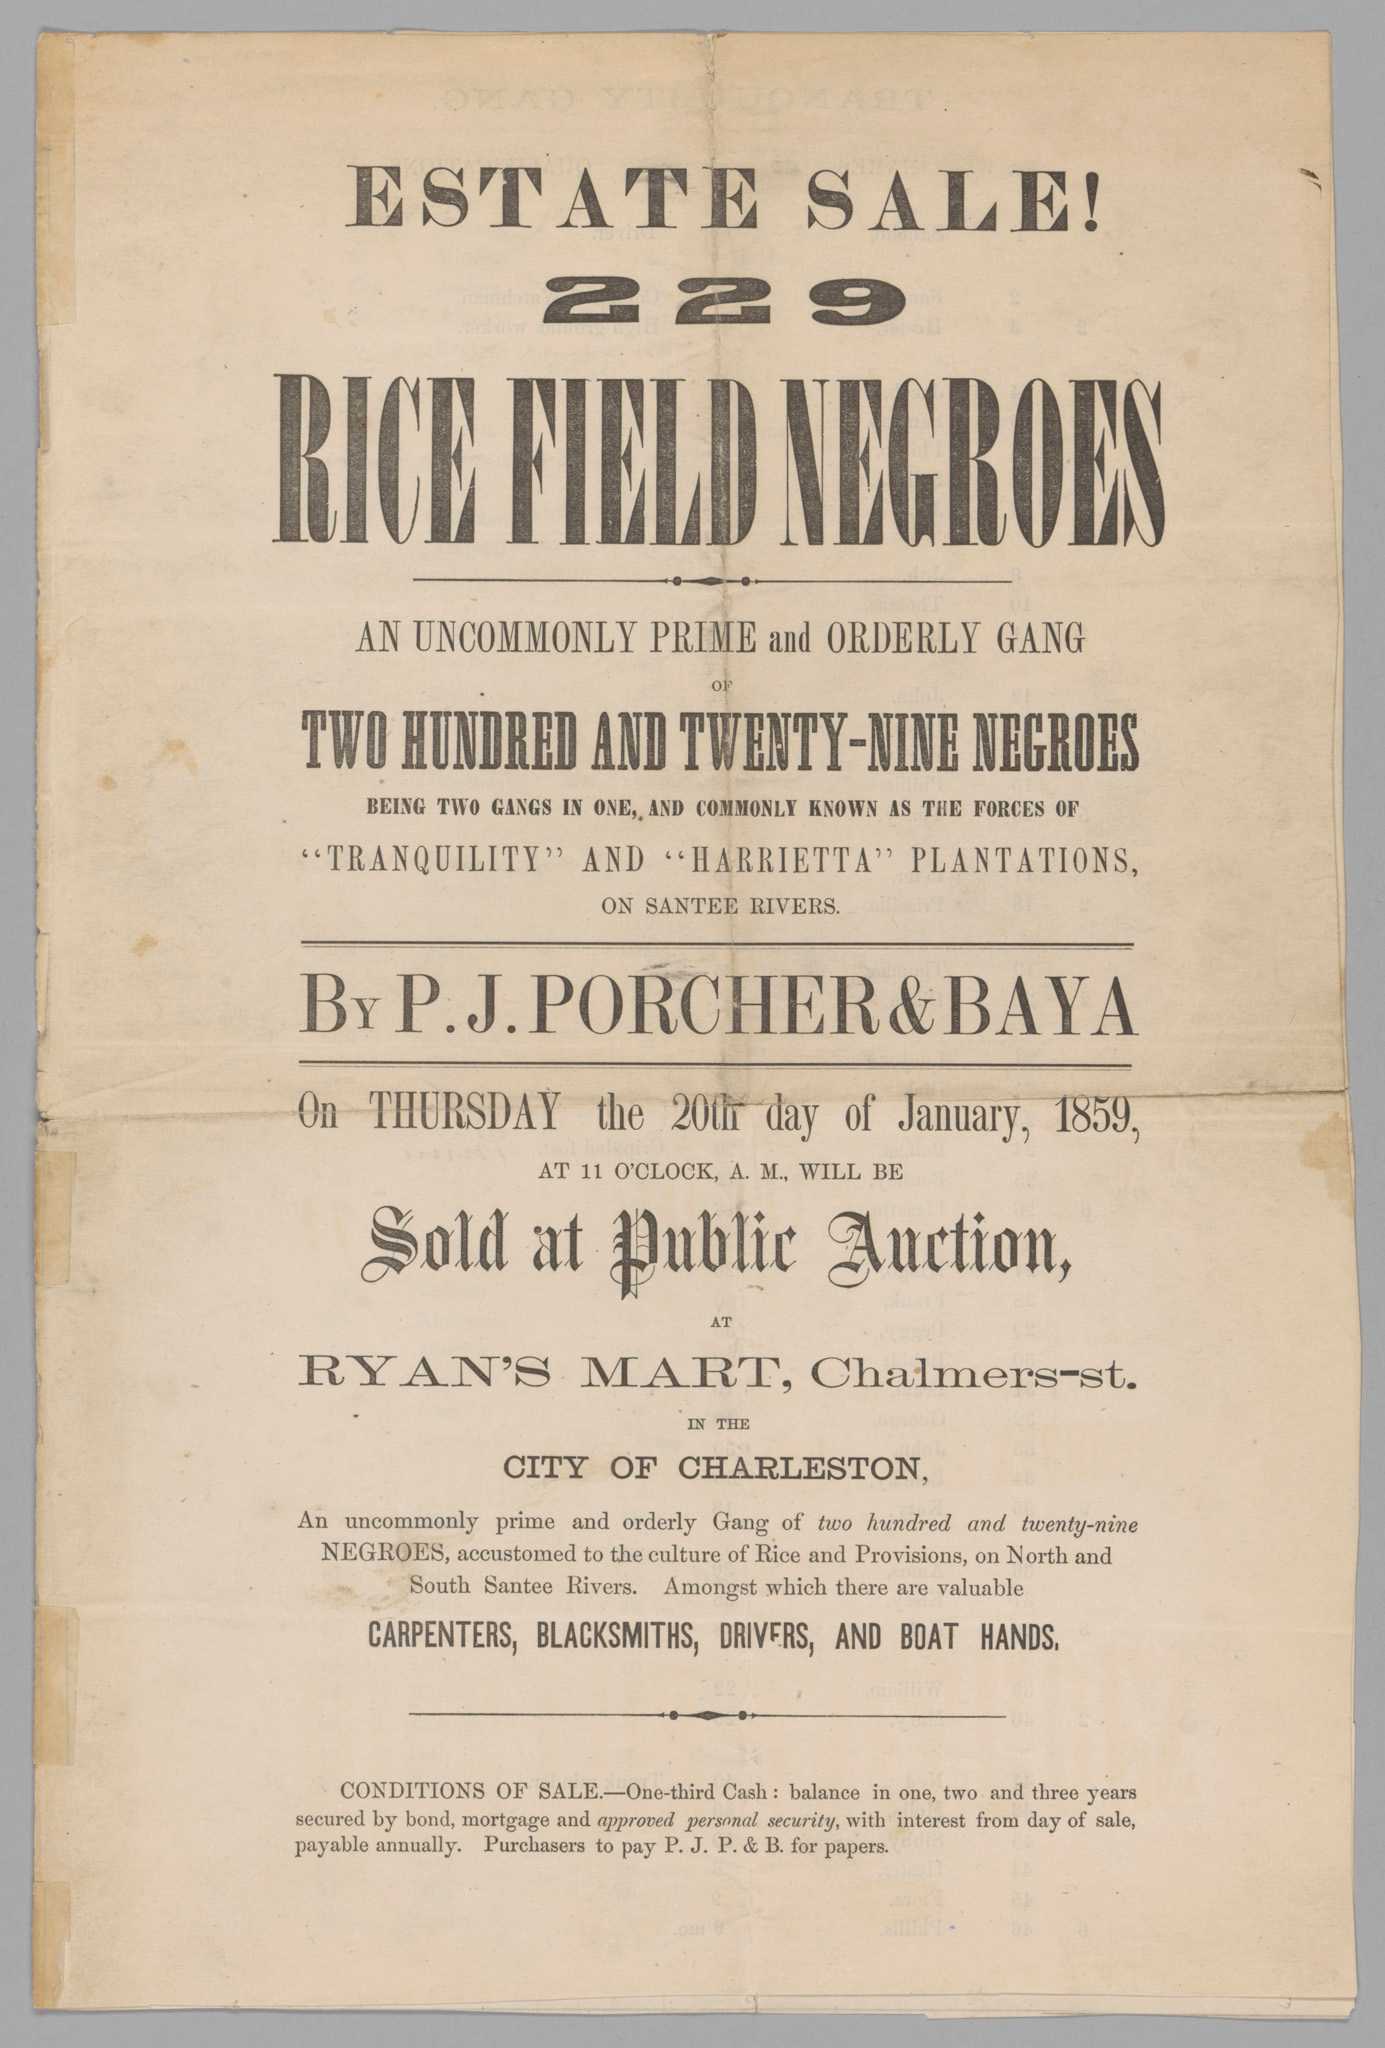 This broadside is an announcement for an estate sale of 229 enslaved men, women and children.